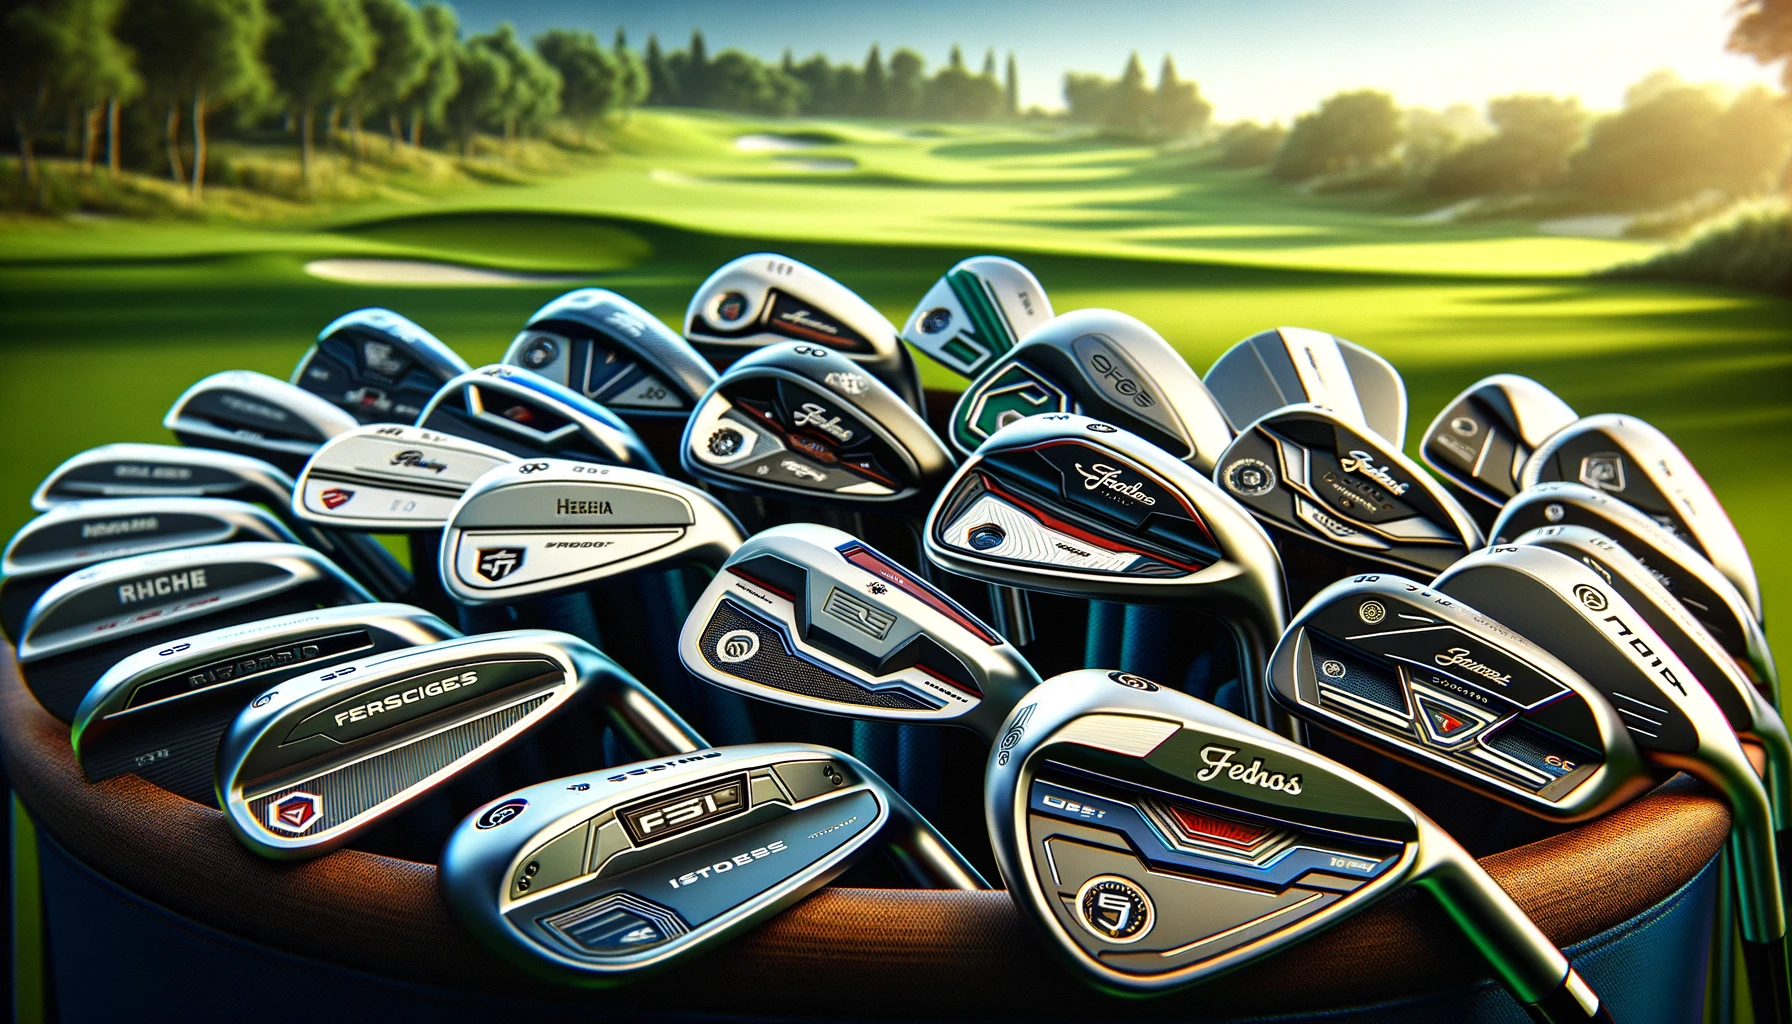 a close-up view of a variety of pitching wedges, showcasing different brands and models. The wedges are arranged artistically